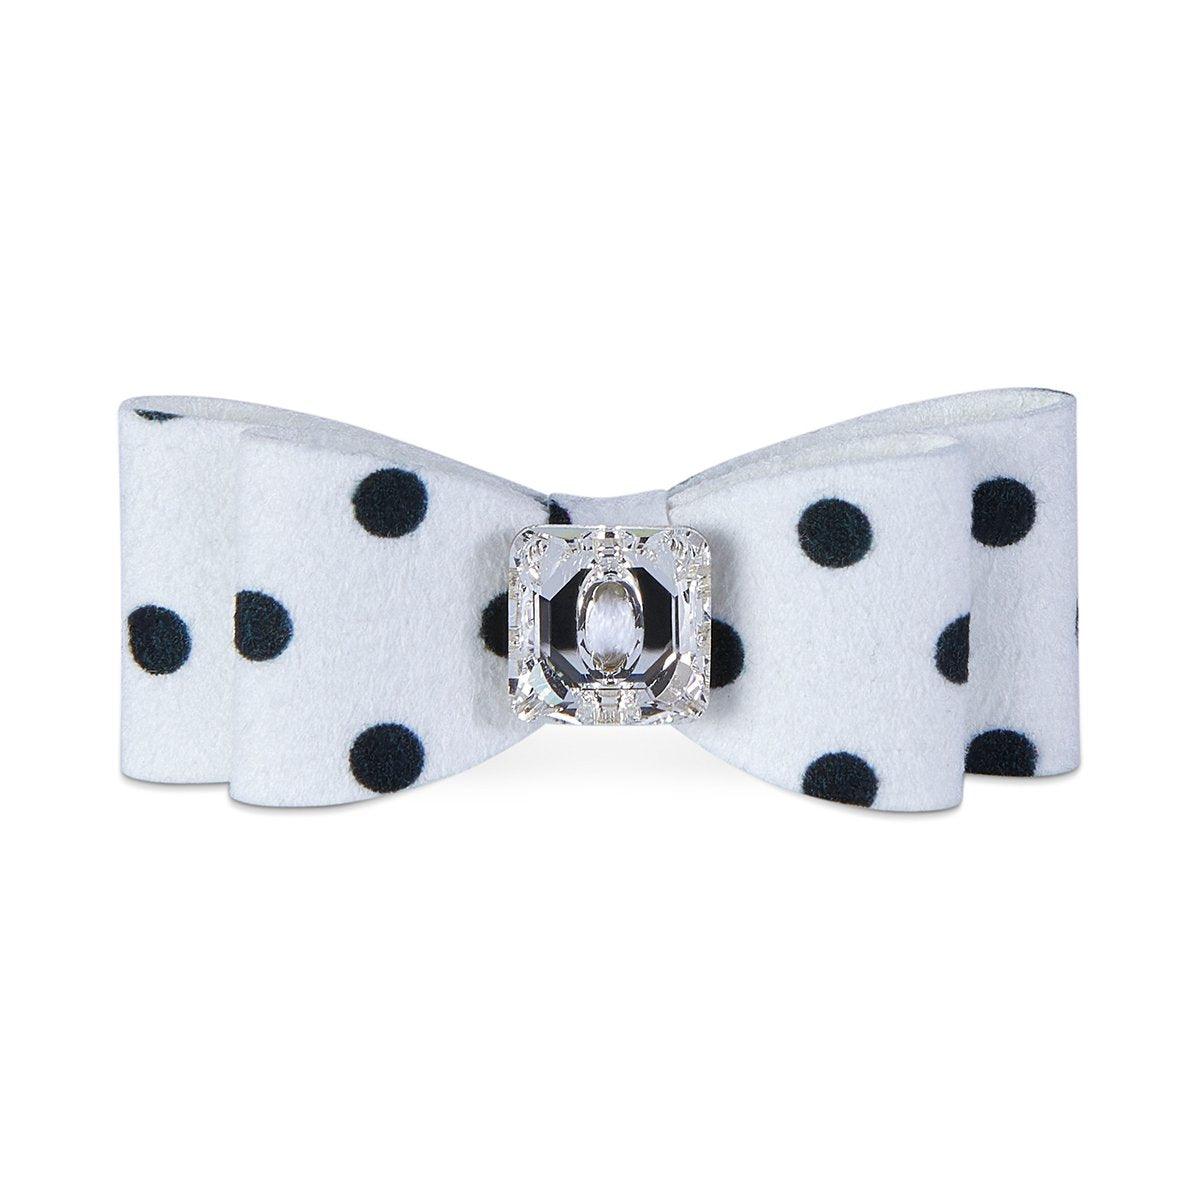 Polka Dot Big Bow Hair Bow - Rocky & Maggie's Pet Boutique and Salon